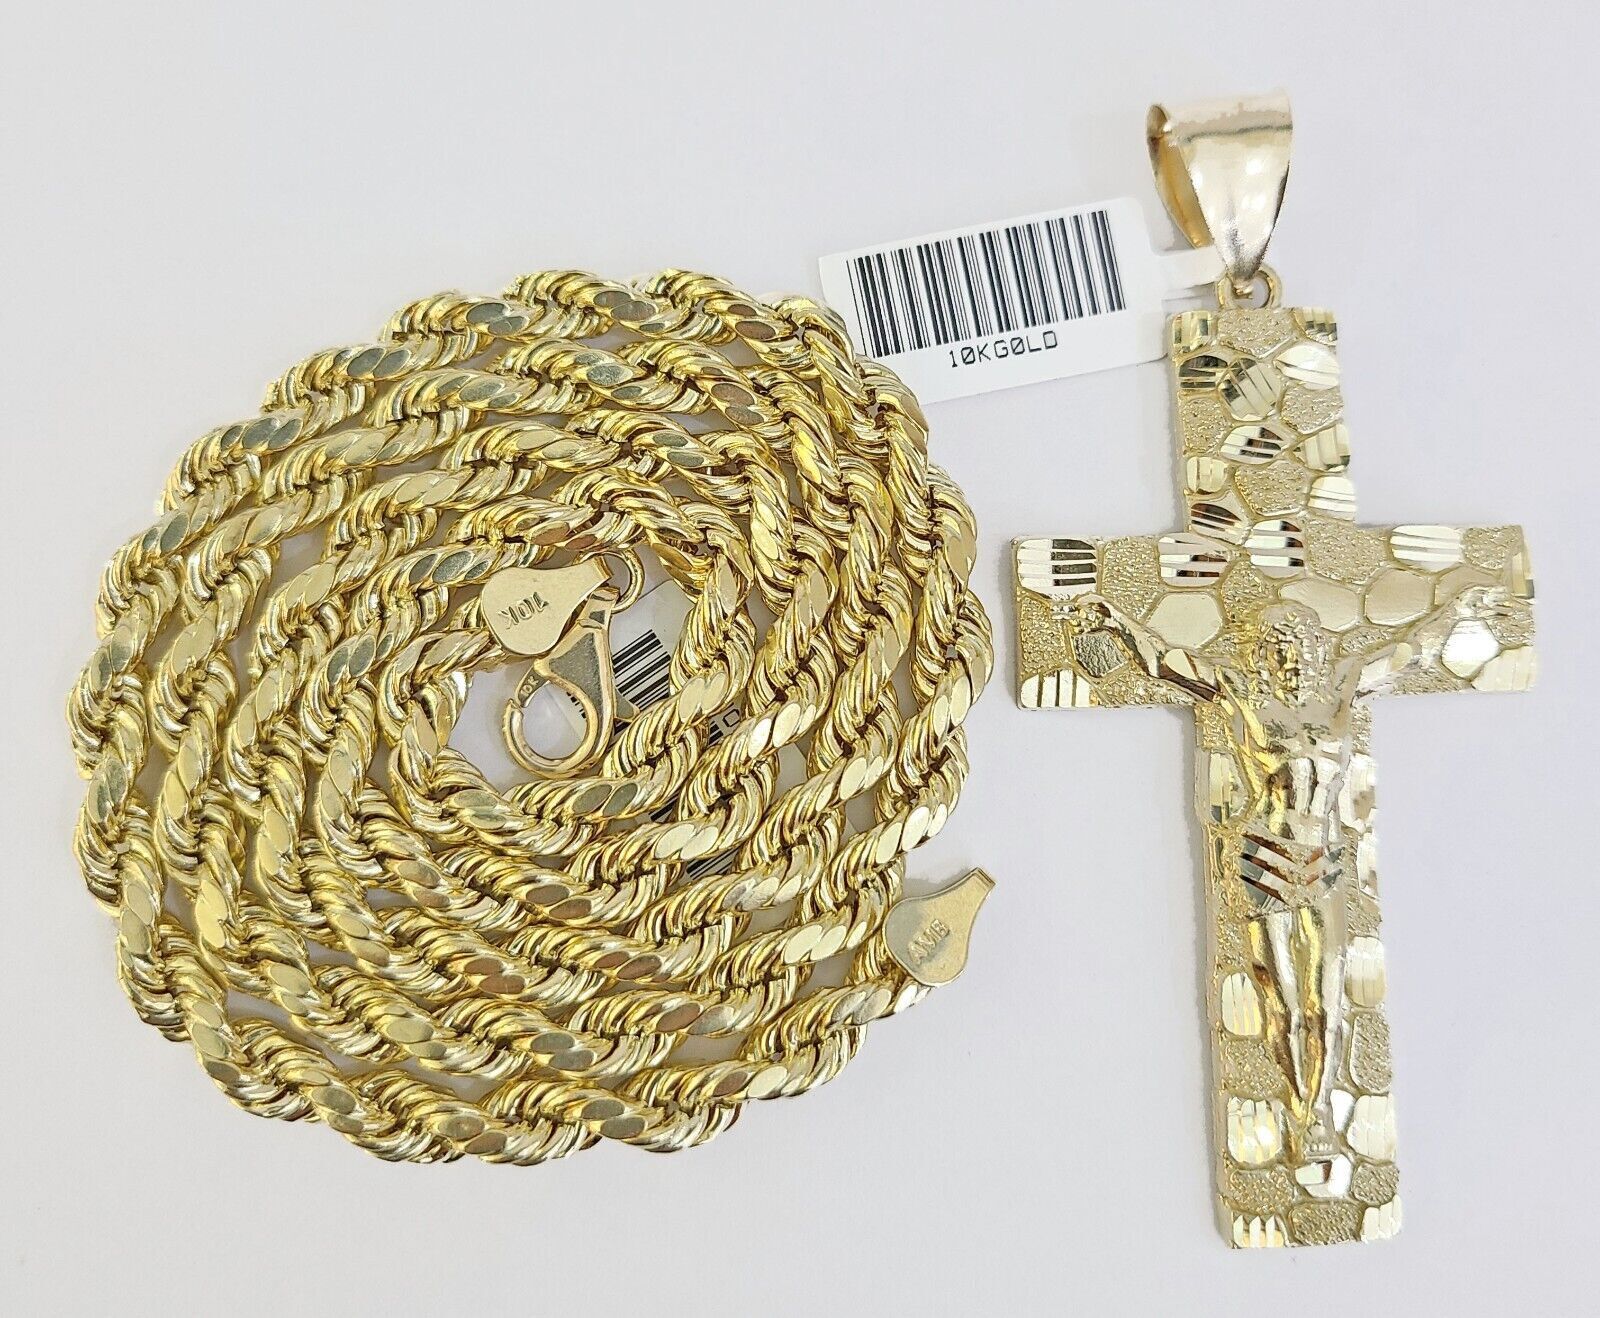 Real 10k Gold Rope Chain Necklace Jesus Cross Charm Pendant Set 20-28